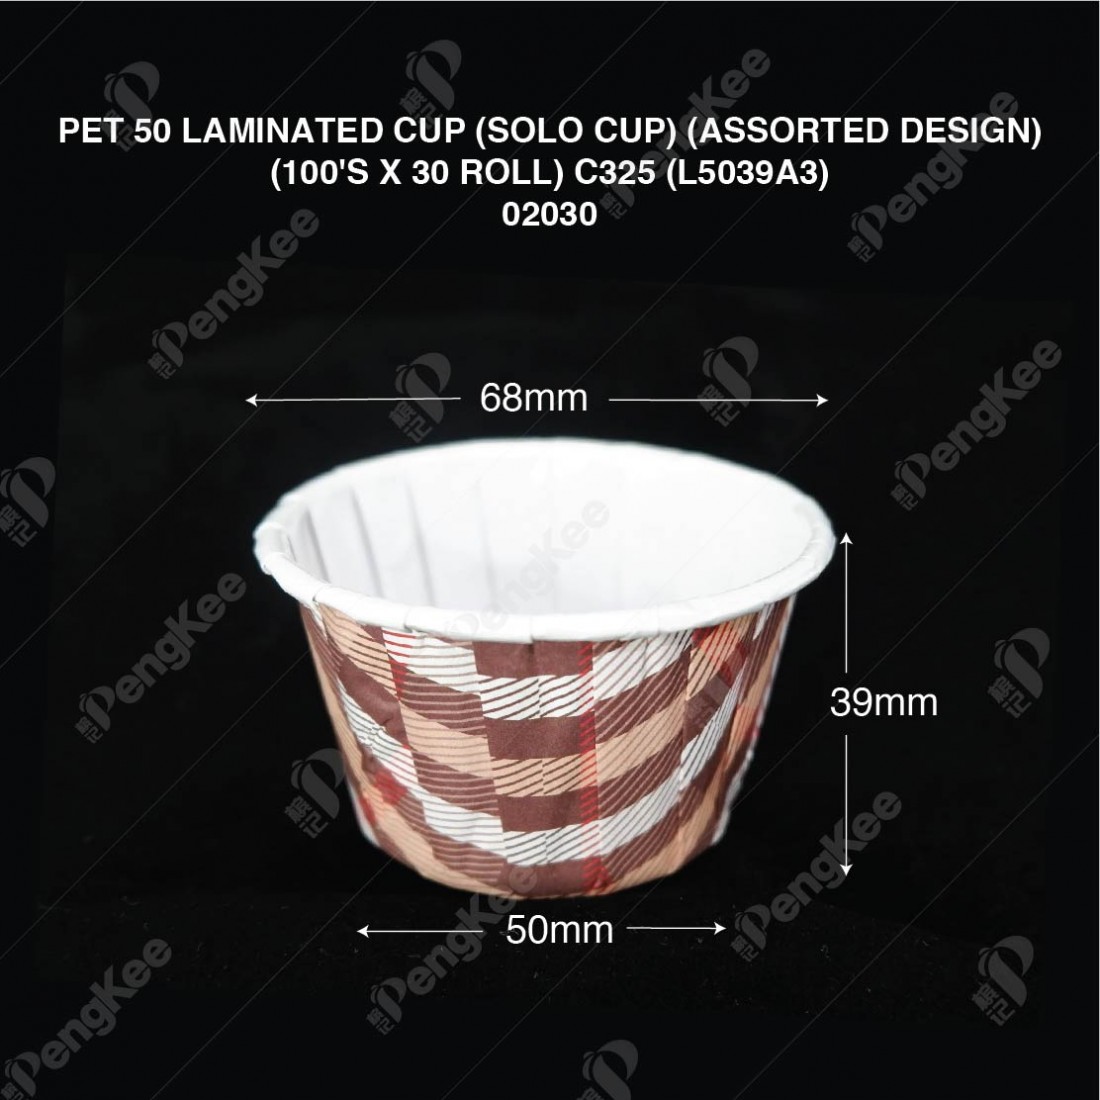 PET 50 LAMINATED CUP (SOLO CUP) (ASSORTED DESIGN) (100'S X 30 ROLL) - C325 (L/5039/A3)